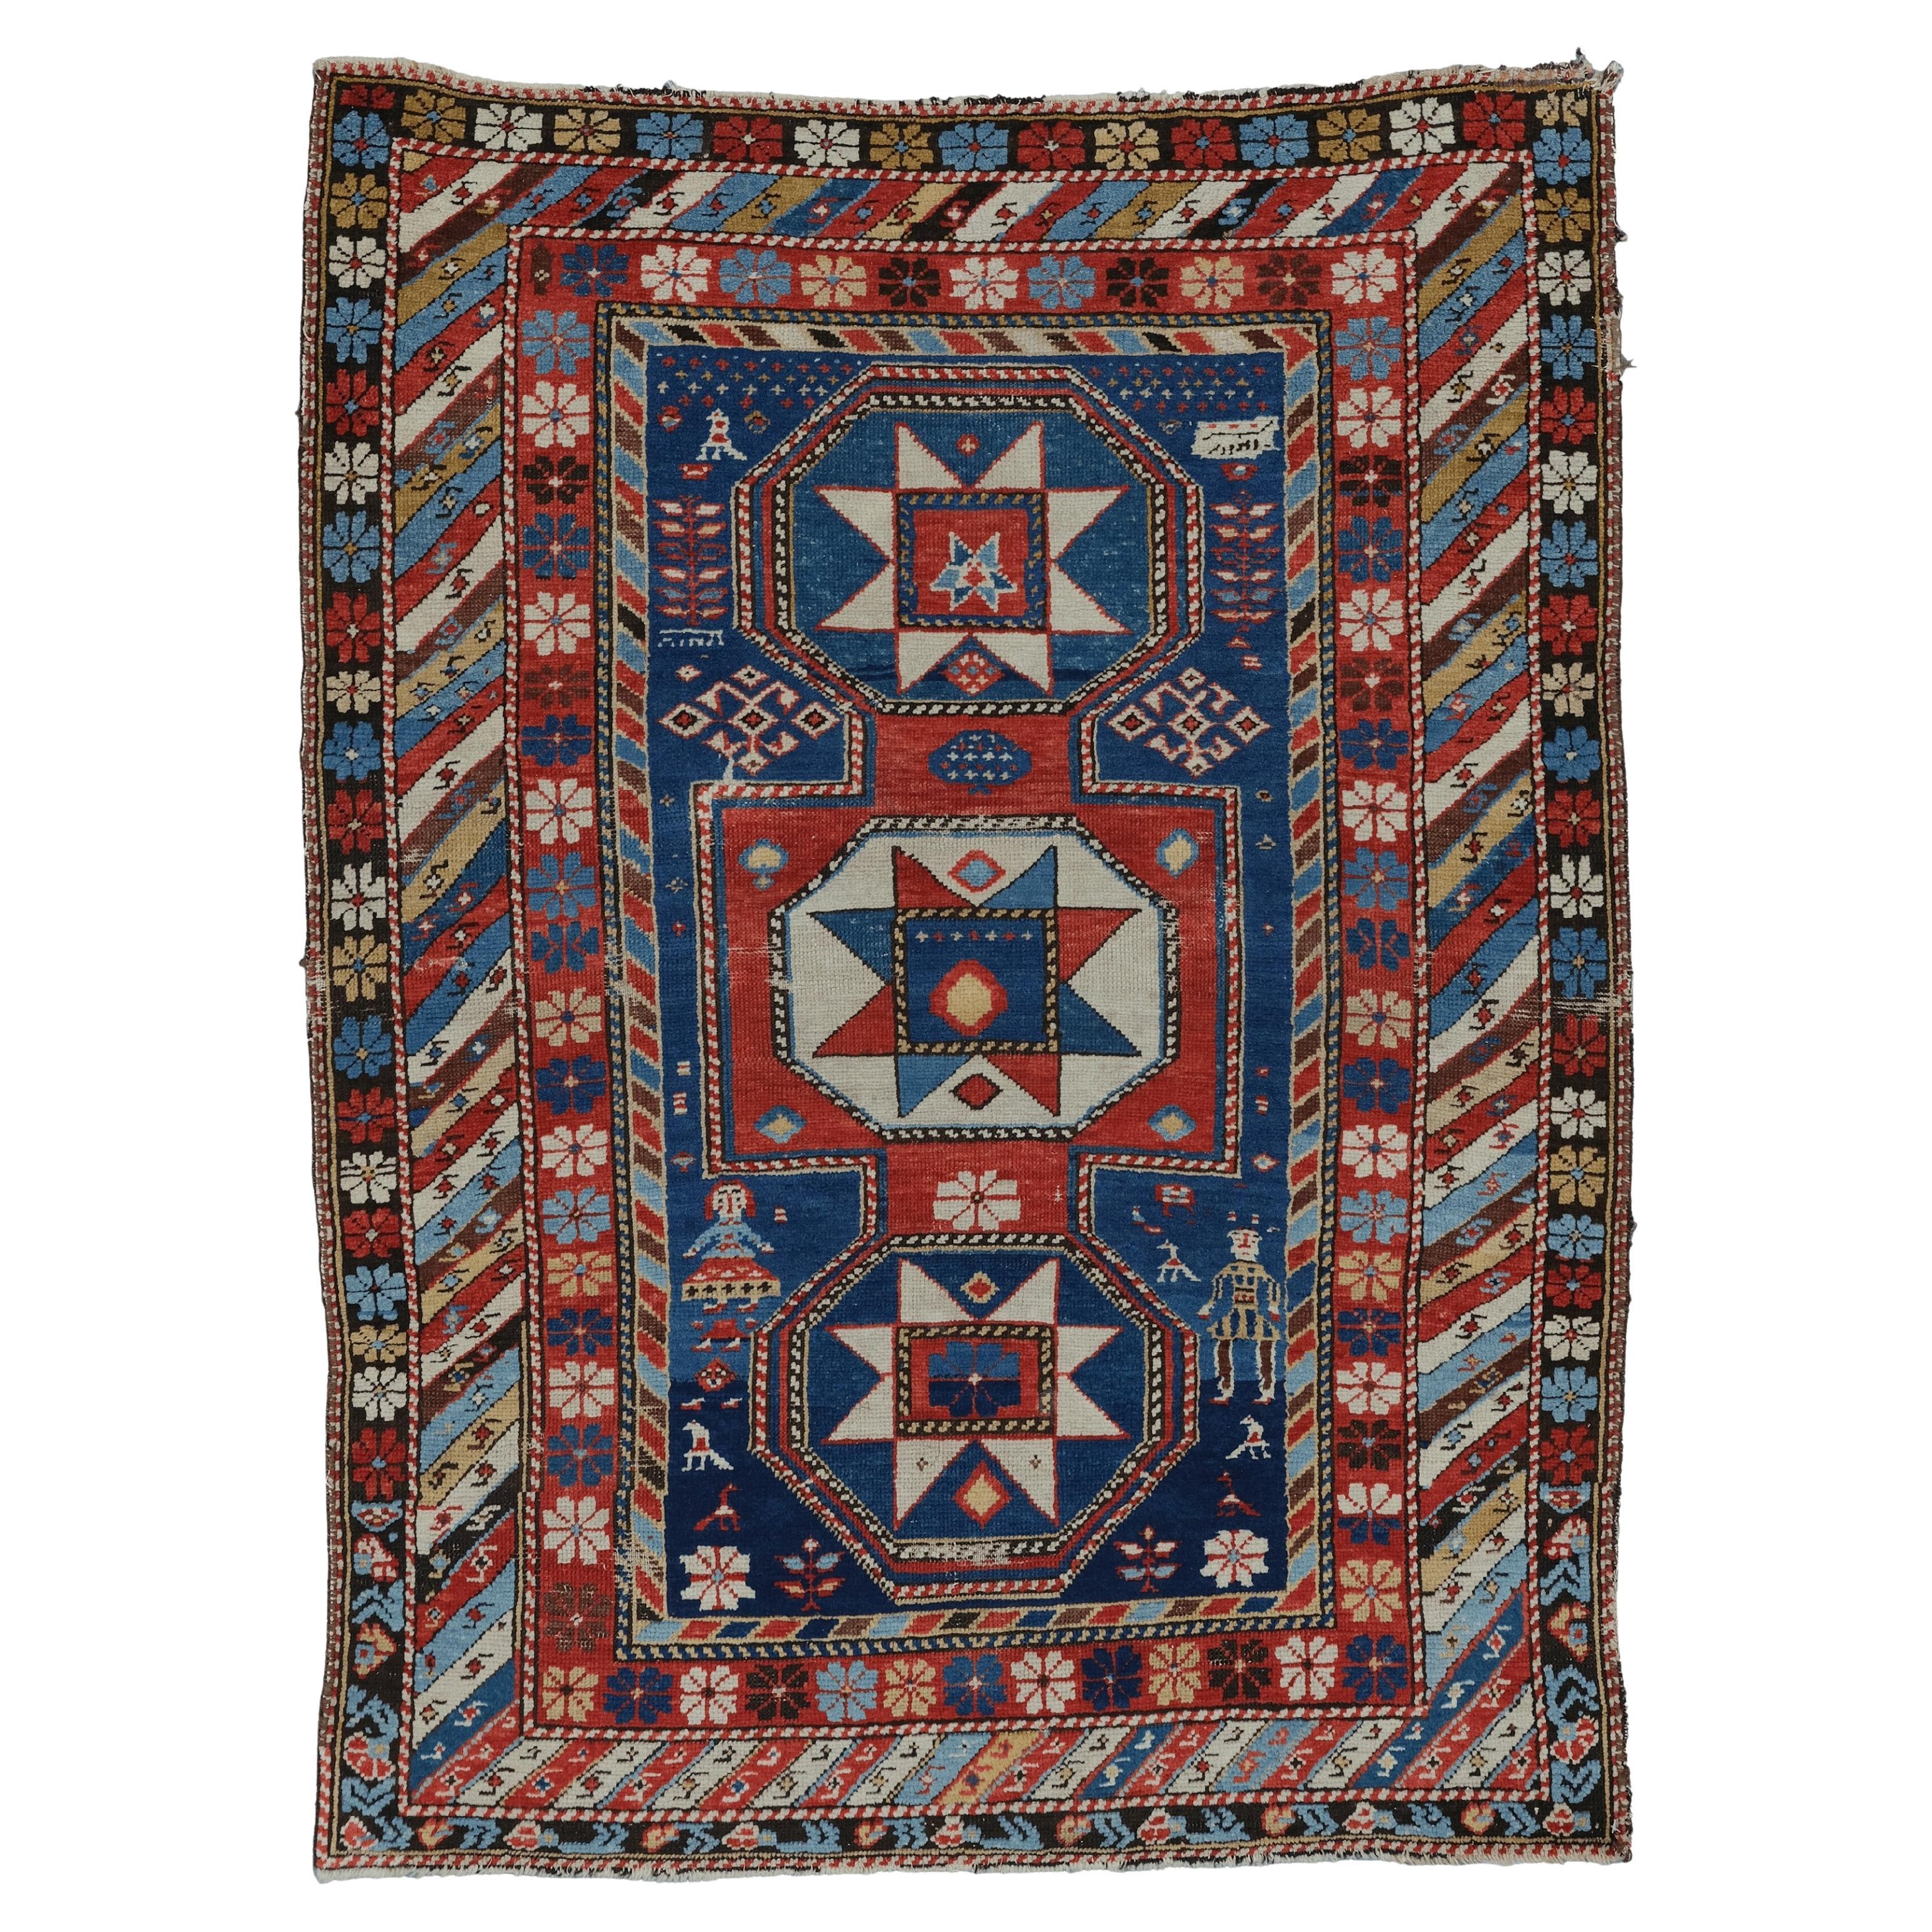 Middle of the 19th Century Shirvan Lezgi Rug, Antique Rug, Caucasian Rug For Sale